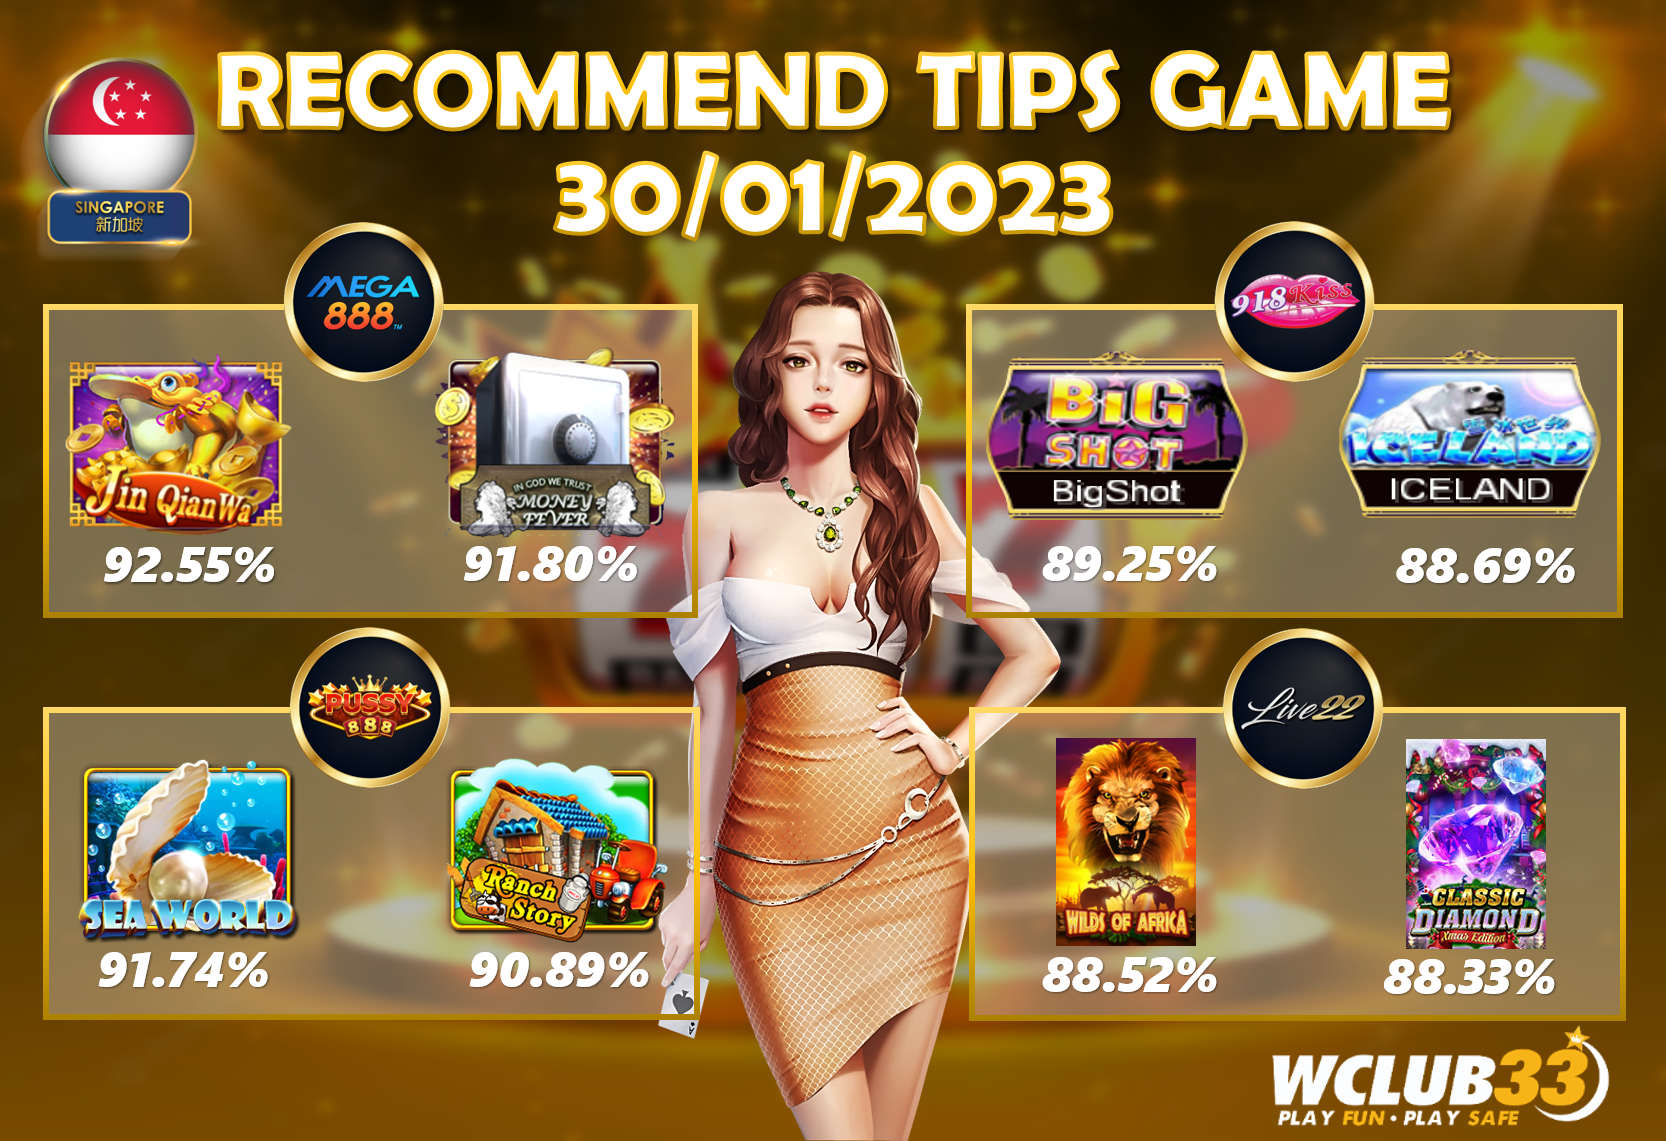 UPDATE TIPS GAME 30/01